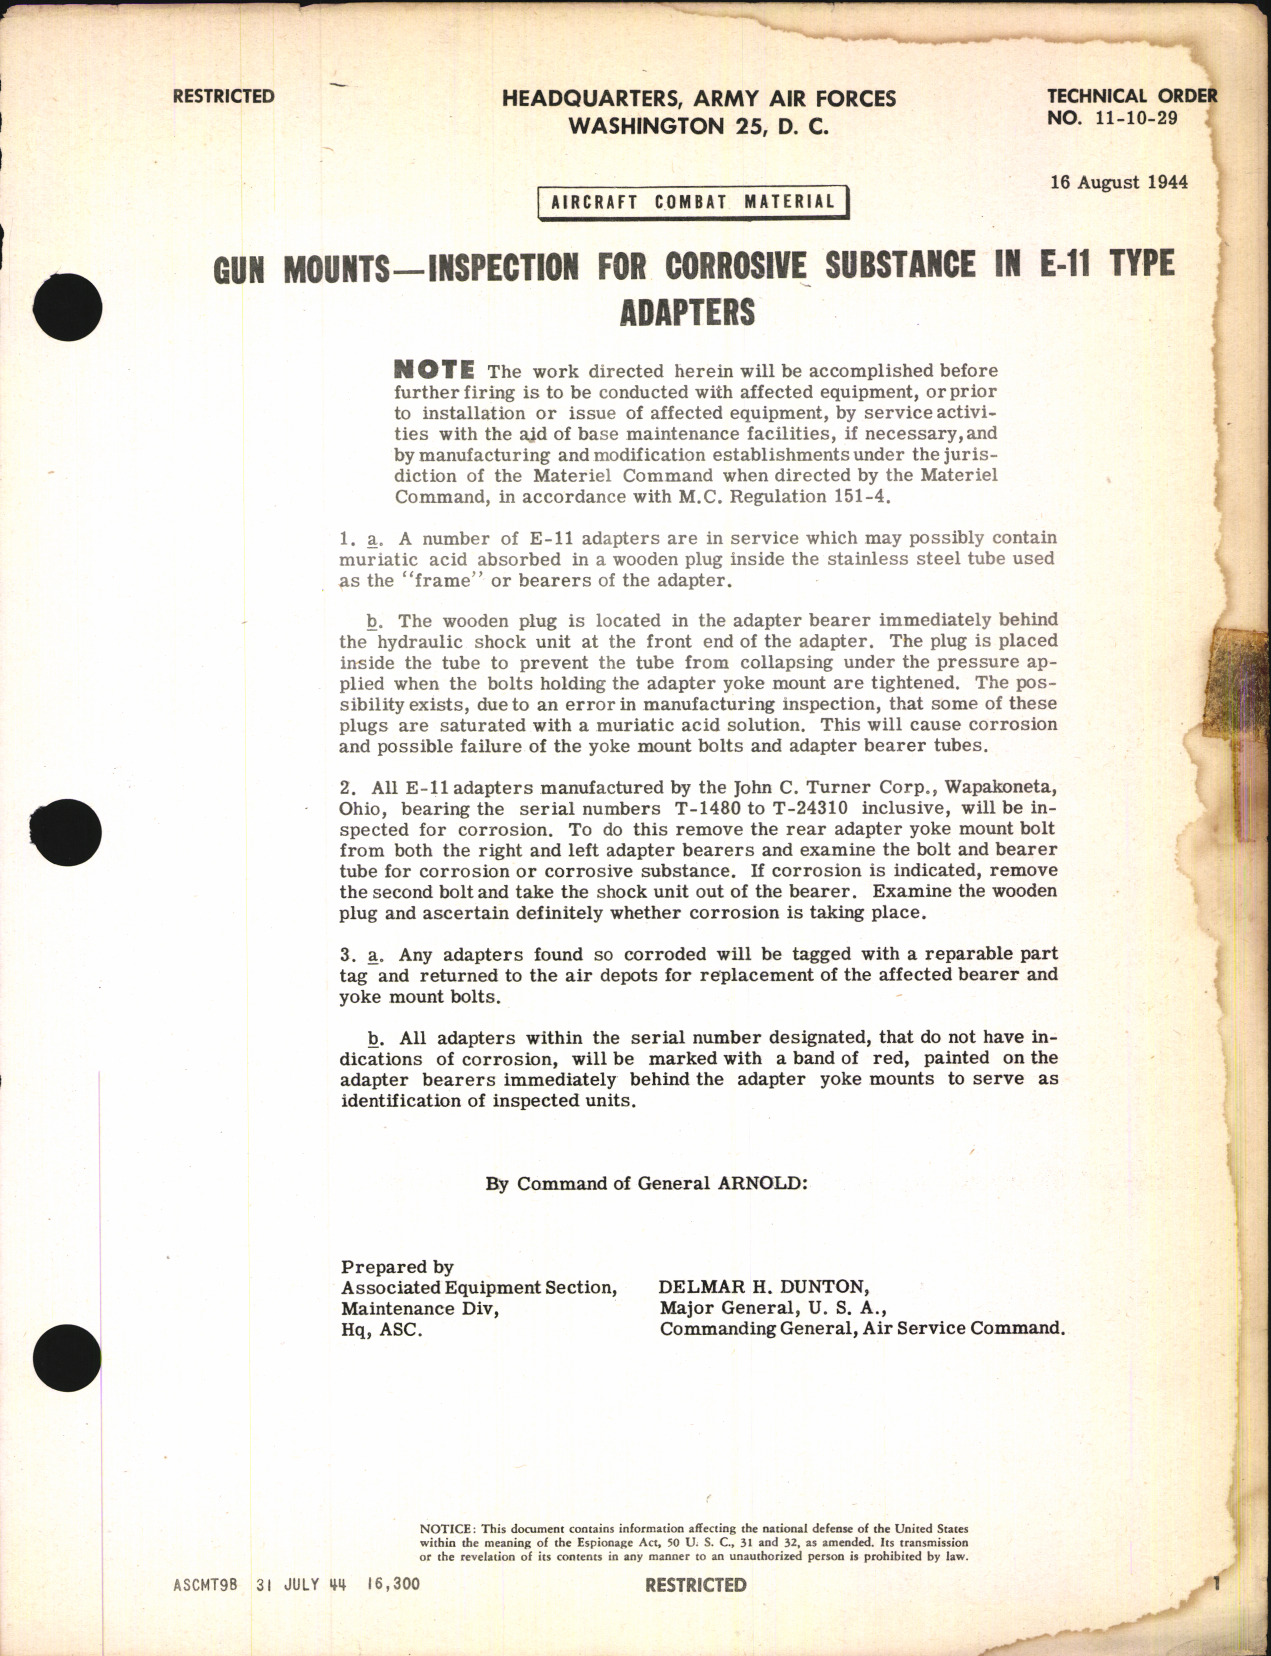 Sample page 1 from AirCorps Library document: Inspection of Corrosive Substance in E-11 Type Gun Mount Adapters